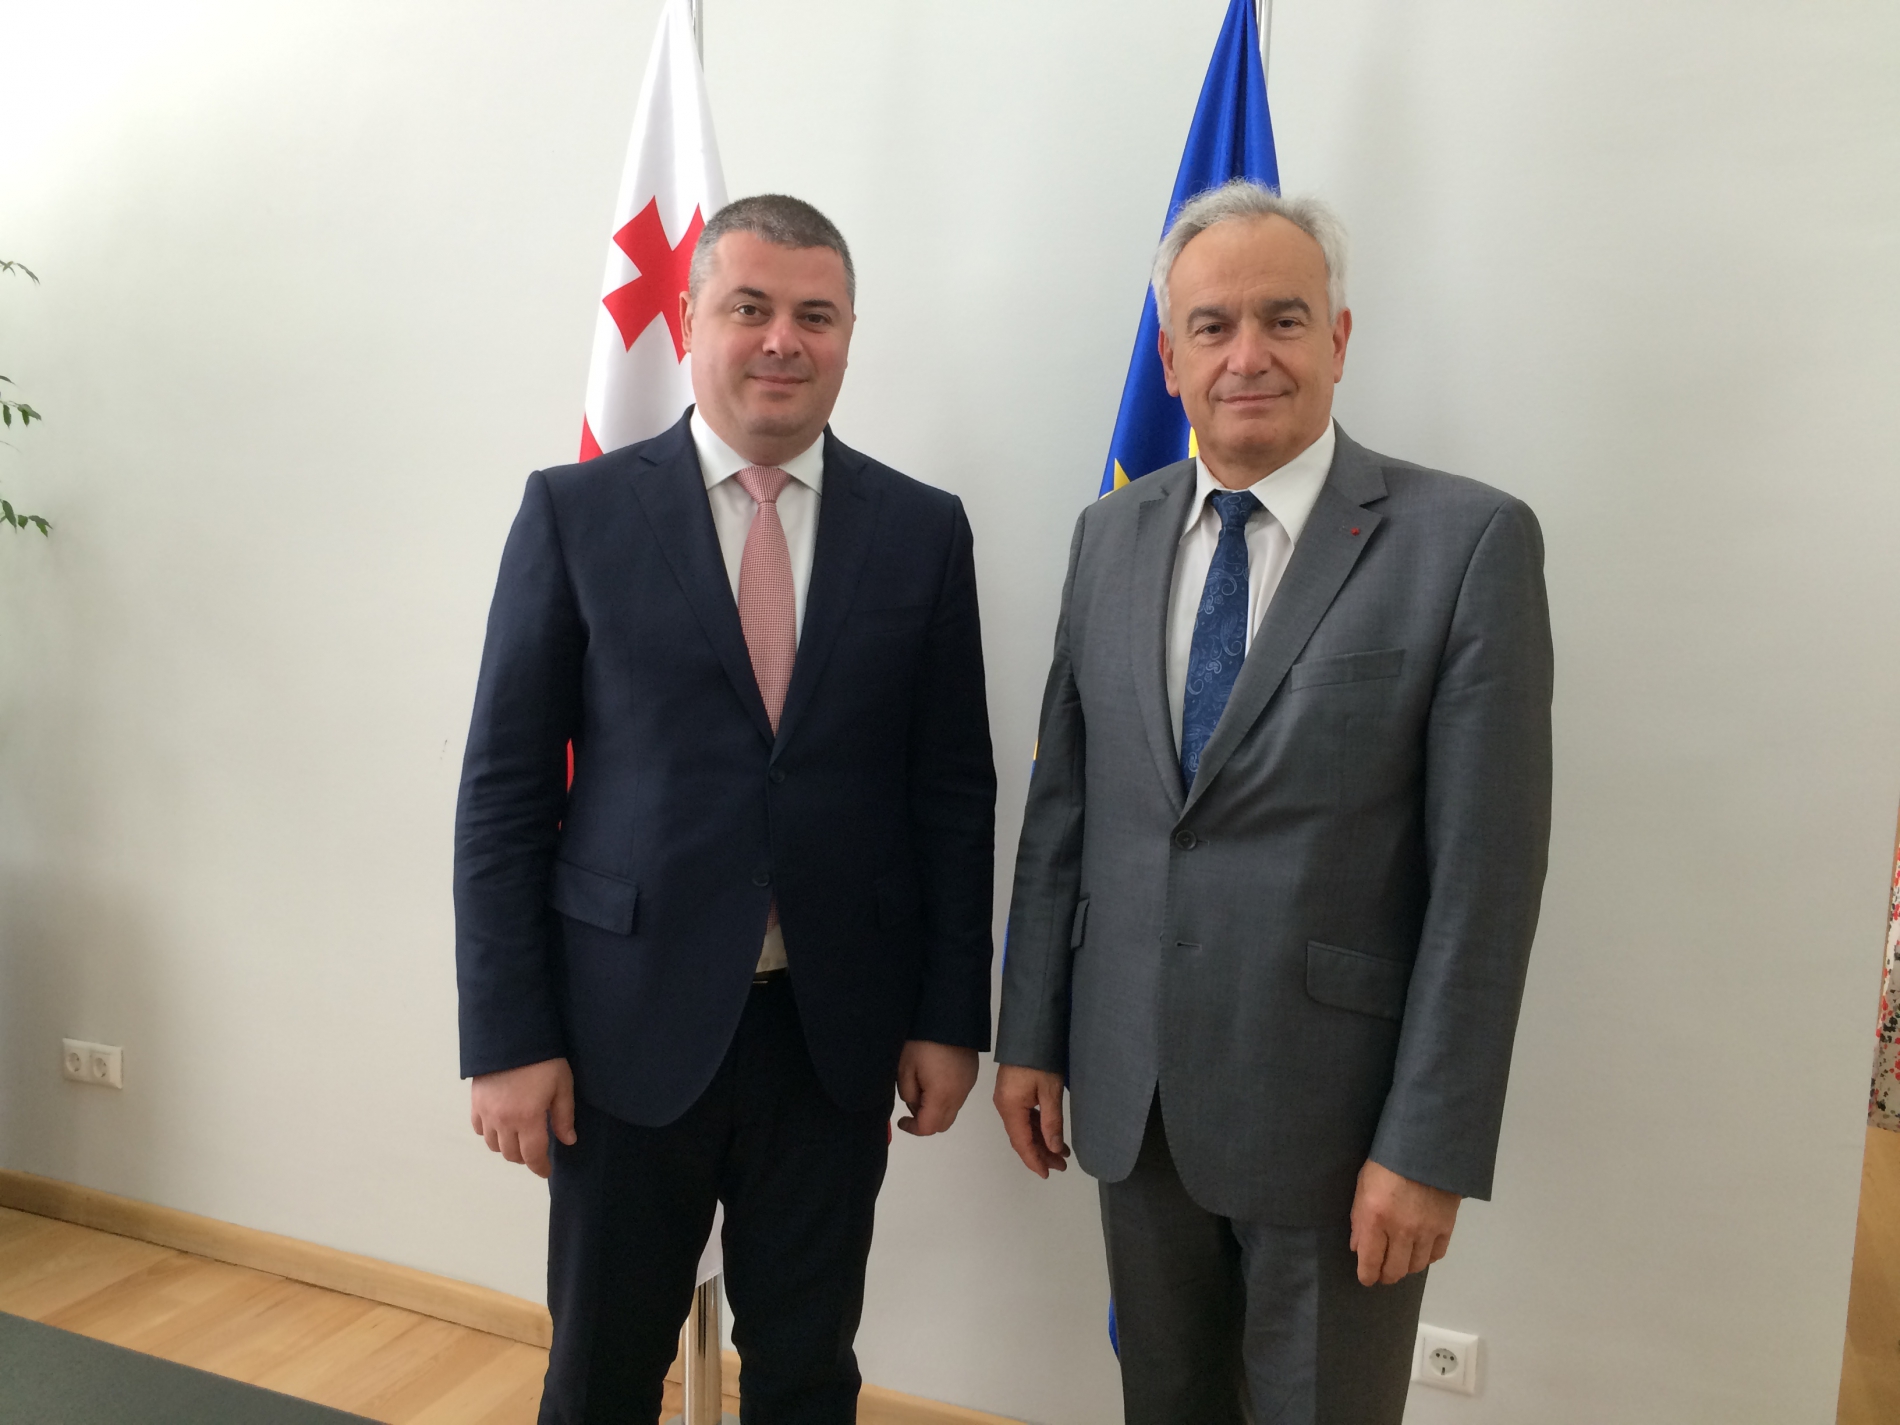 The OIV Director General visits Georgia